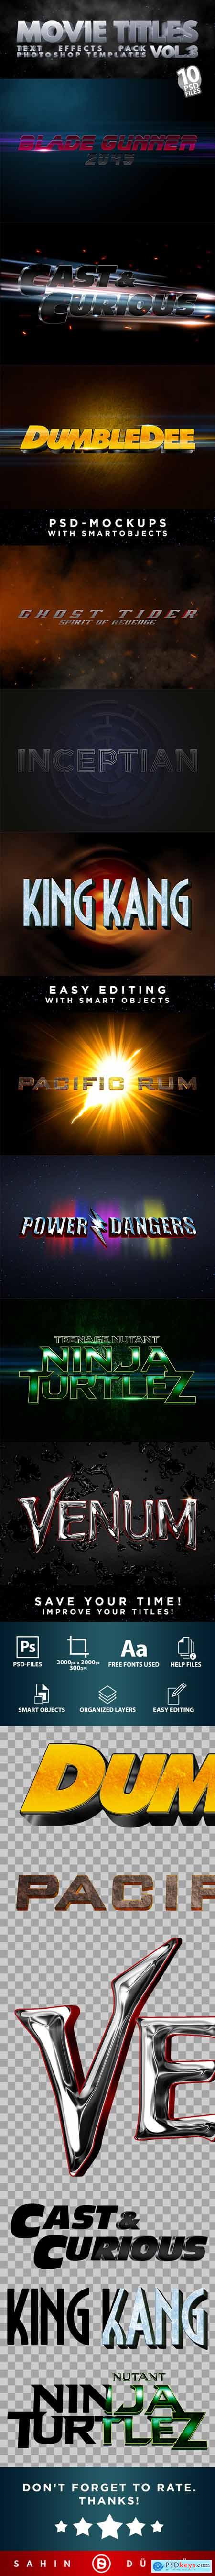 MOVIE TITLES - Vol.3 Text-Effects Mockups Template-Pack 30289874